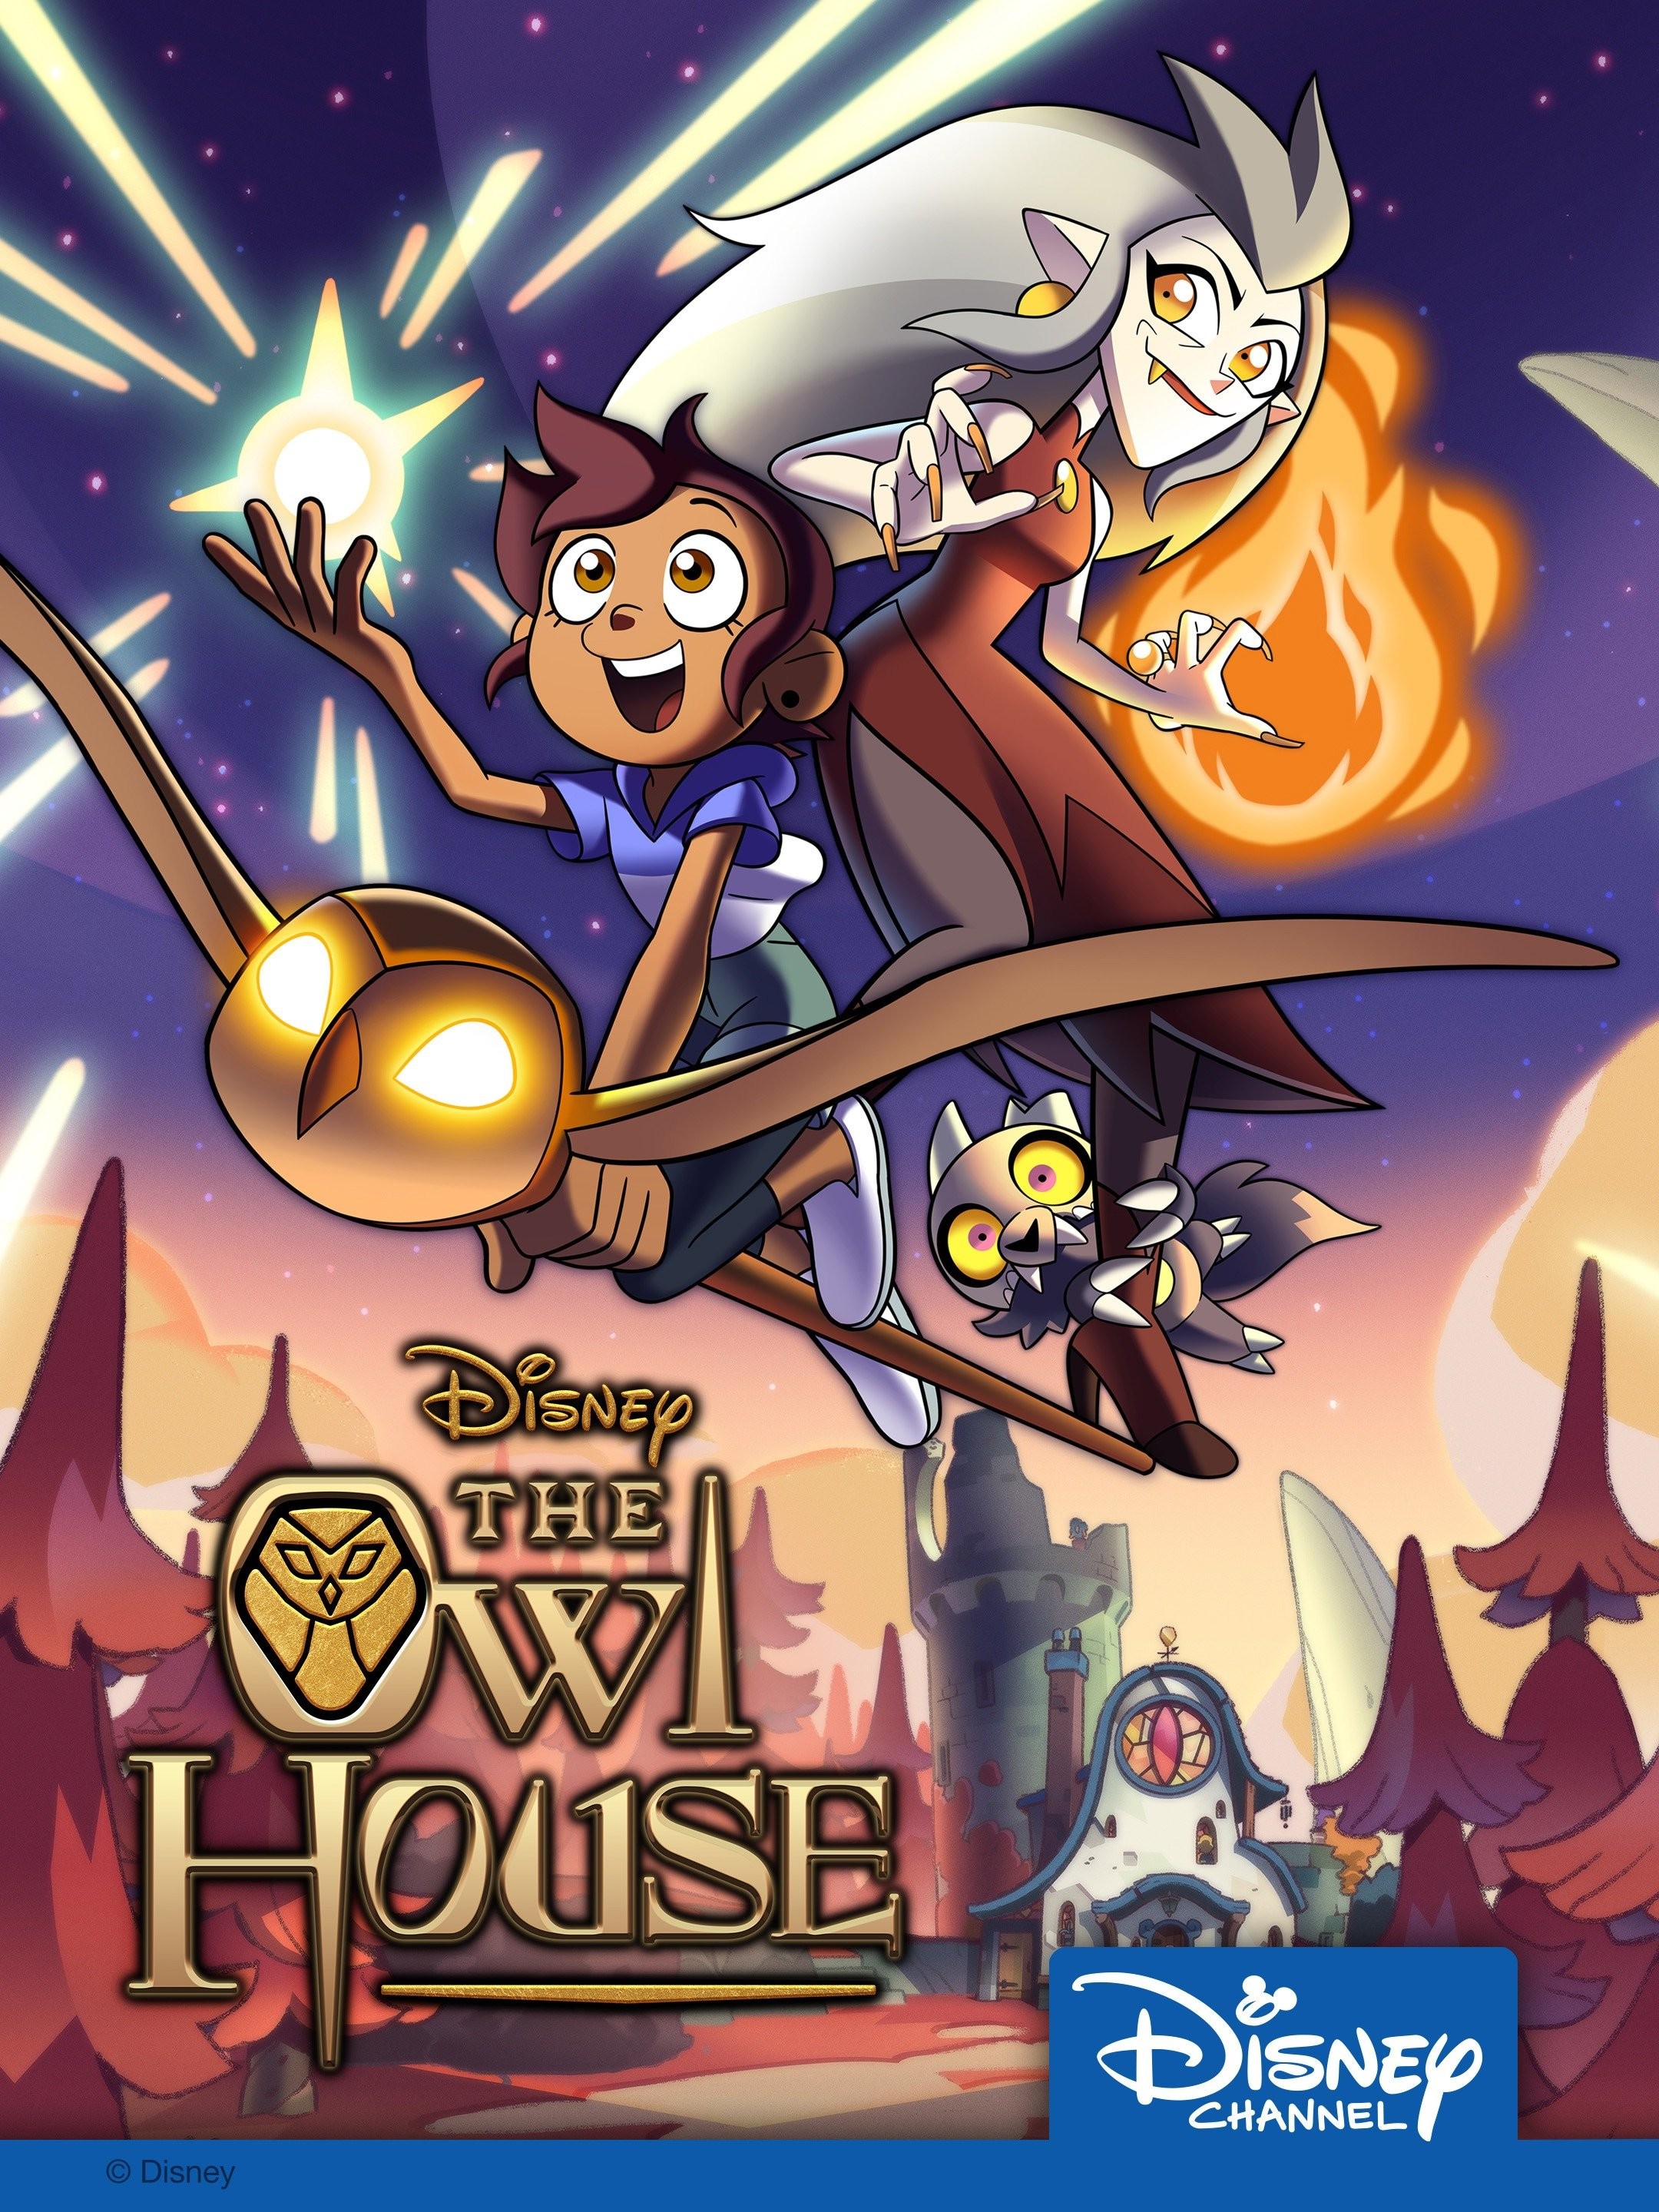 The Owl House season 2 release date confirmed: How many episodes in total?